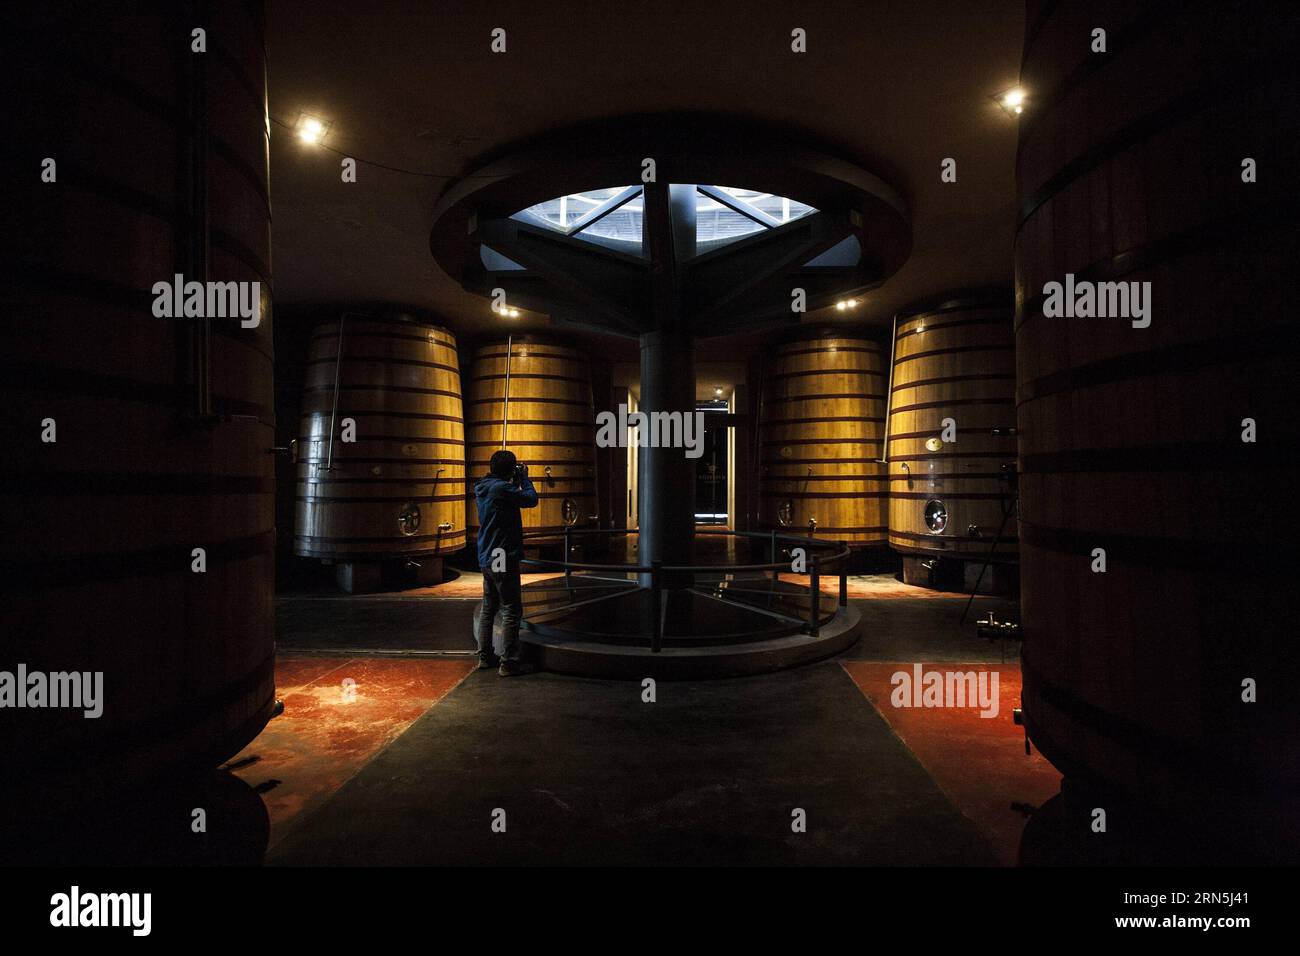 Image taken on June 24, 2015 shows a visitor taking a photograph in the O. Fournier Winery, in La Consulta city, Mendoza province, 1,170km away of Buenos Aires city, Argentina. ) (jg) (da) ARGENTINA-MENDOZA-INDUSTRY-WINE-FEATURE MARTINxZABALA PUBLICATIONxNOTxINxCHN   Image Taken ON June 24 2015 Shows a Visitor Taking a Photo in The O Fournier Winery in La CONSULTA City Mendoza Province 1 170km Away of Buenos Aires City Argentina JG there Argentina Mendoza Industry Wine Feature MartinXZabala PUBLICATIONxNOTxINxCHN Stock Photo